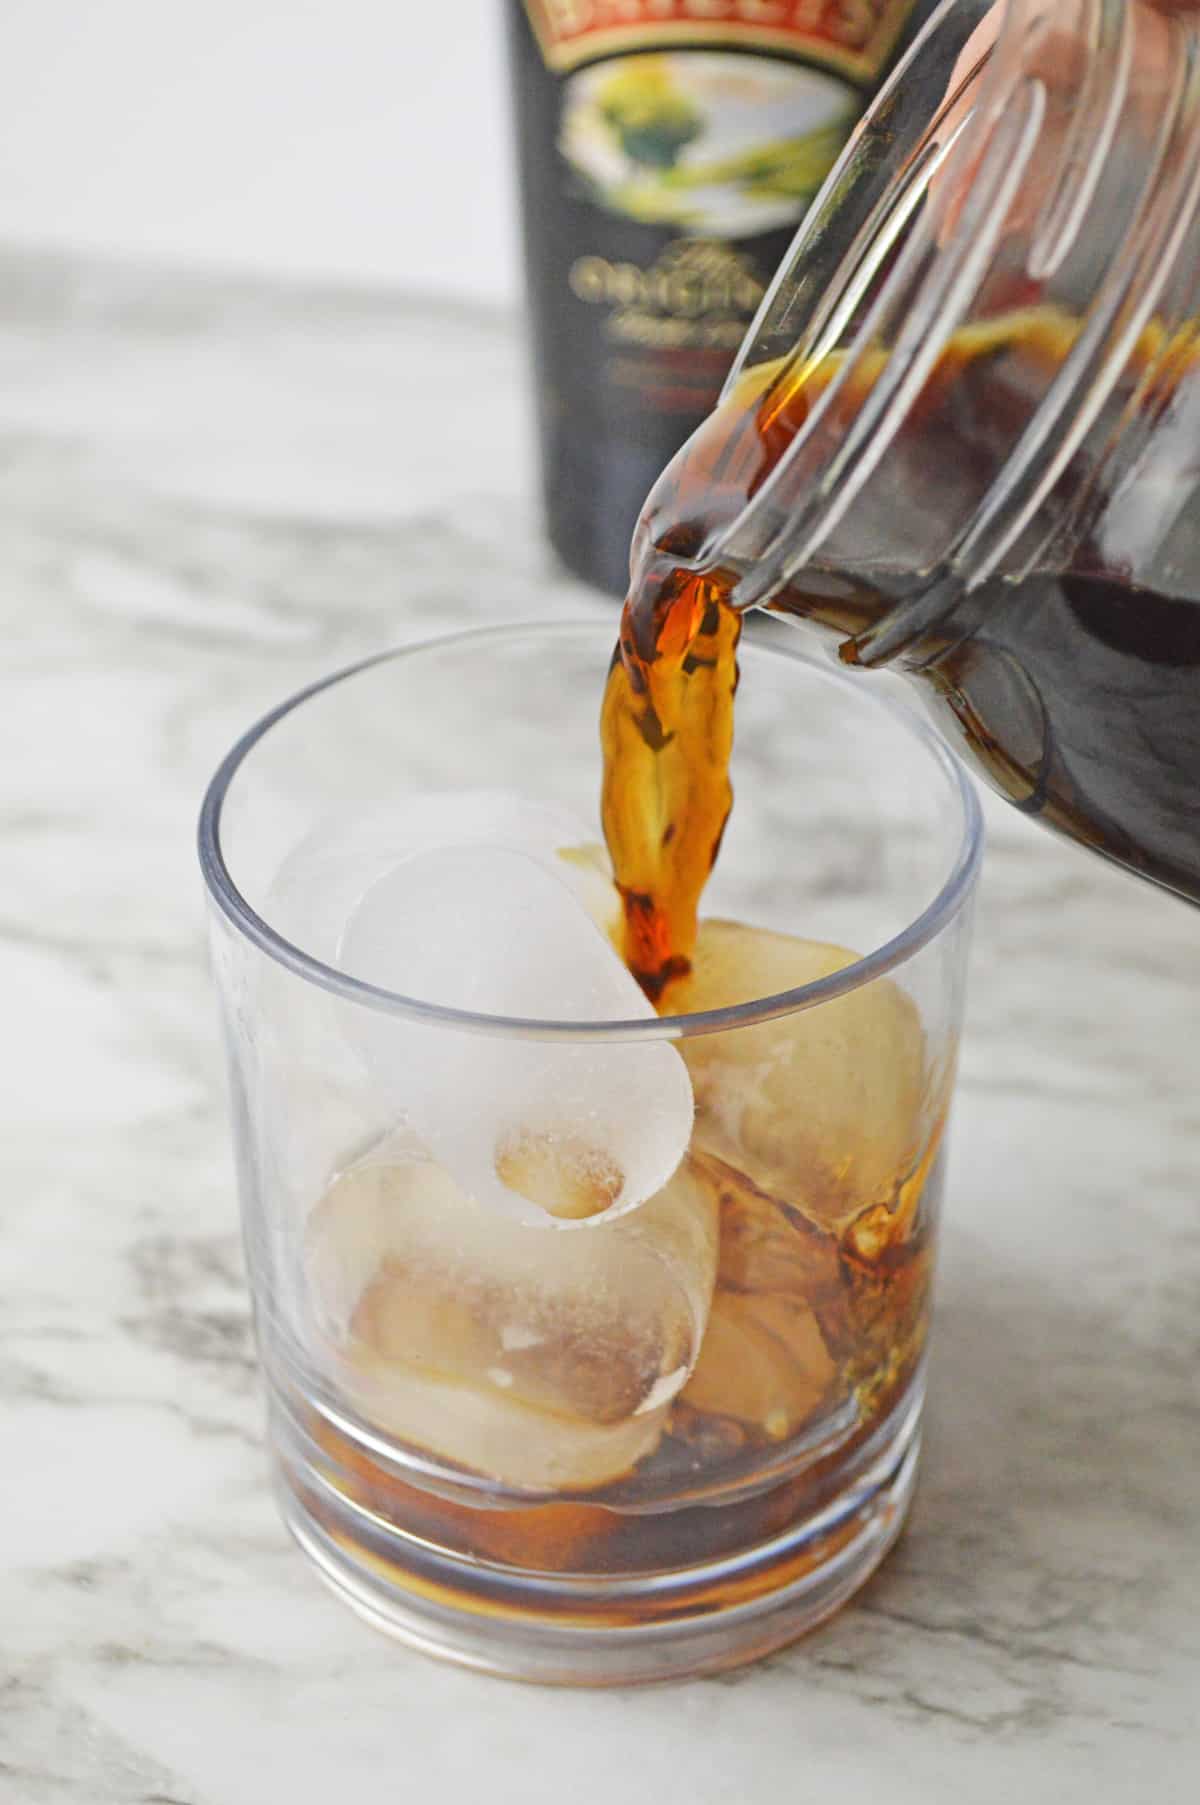 Coffee being poured into a glass over ice.